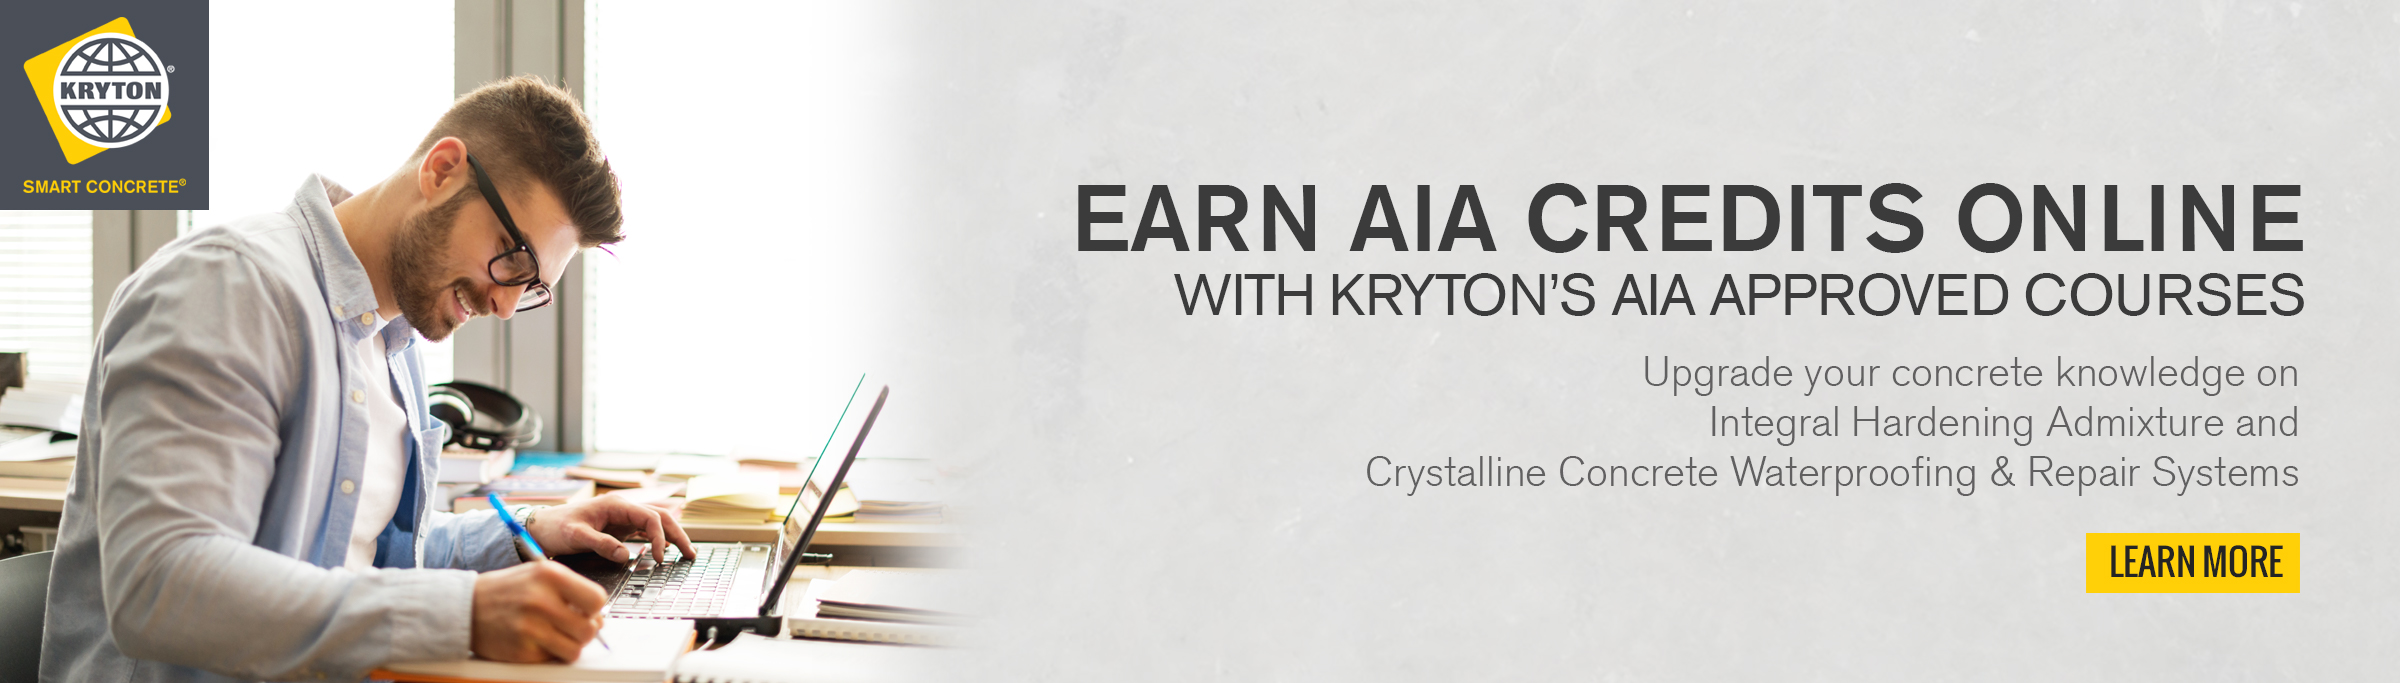 Click here to earn AIA credits online with Kryton's AIA-approved courses.